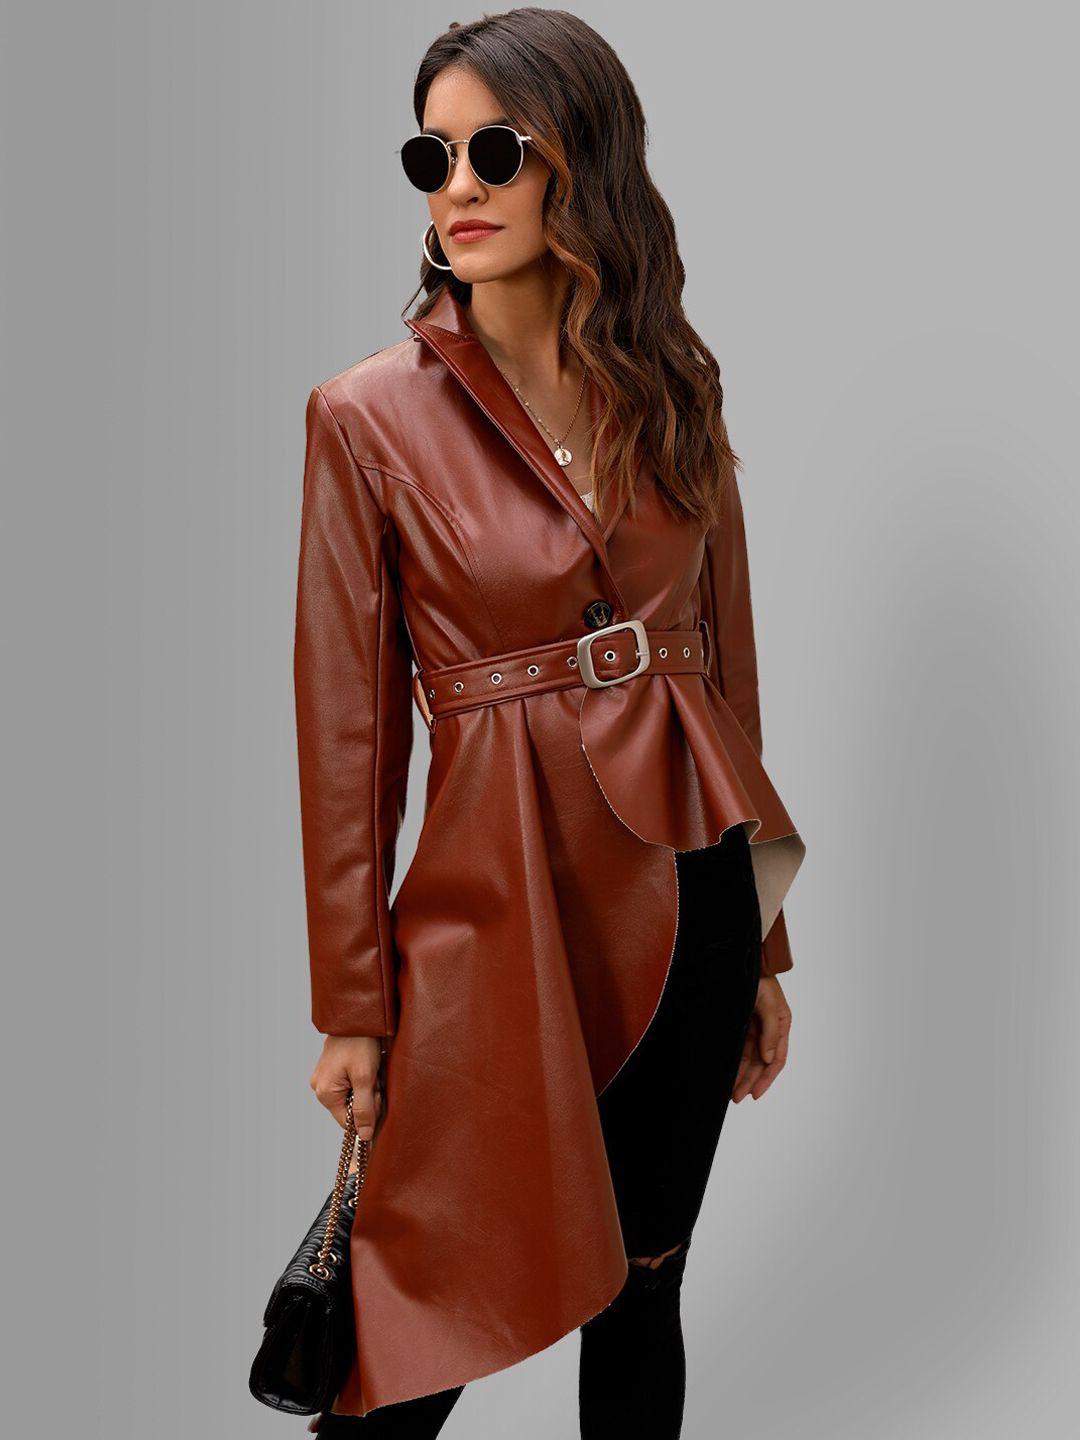 jc collection women brown solid trench coat